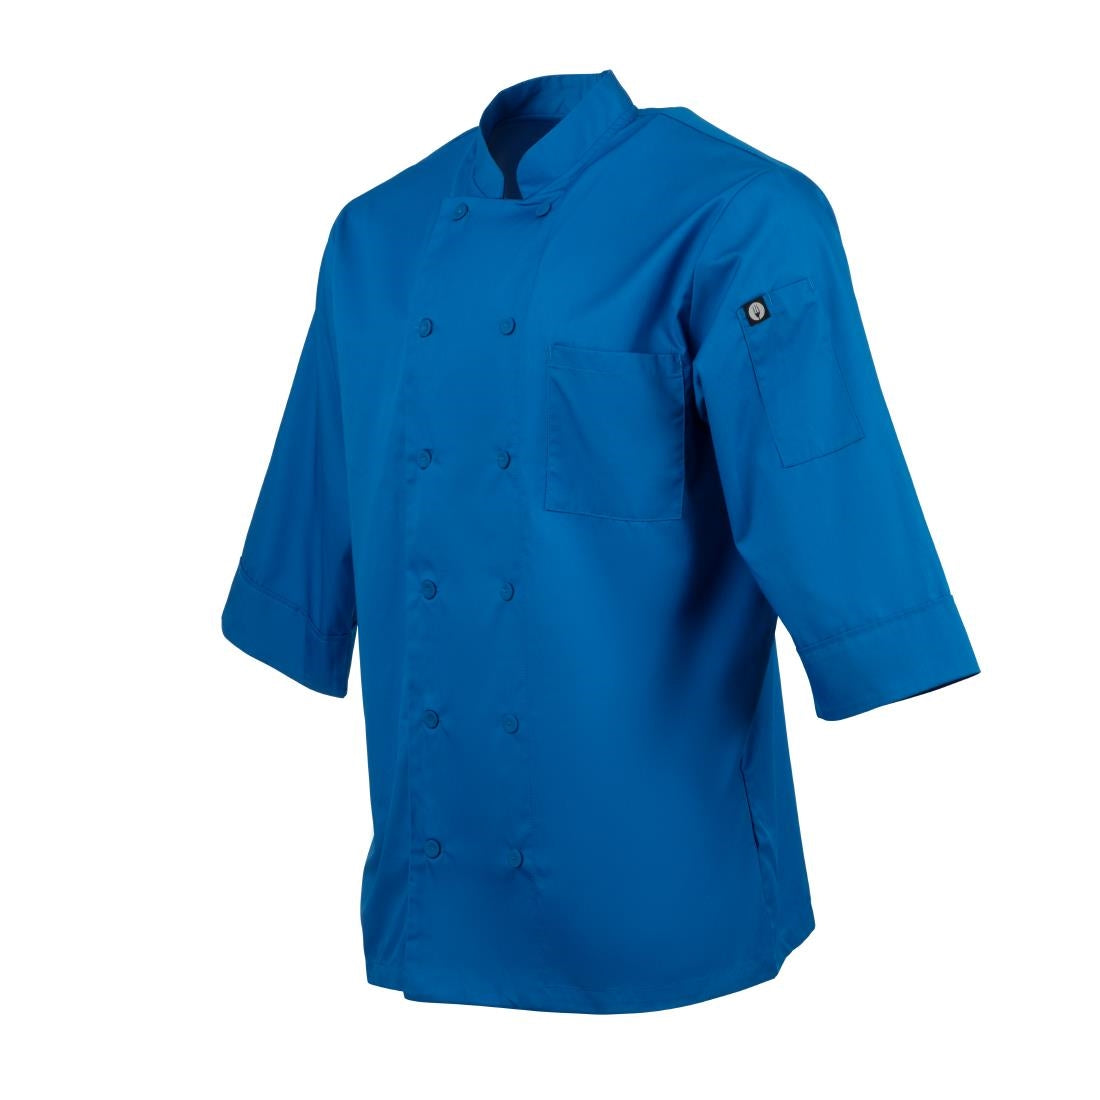 B178-S Chef Works Unisex Chefs Jacket Blue S JD Catering Equipment Solutions Ltd